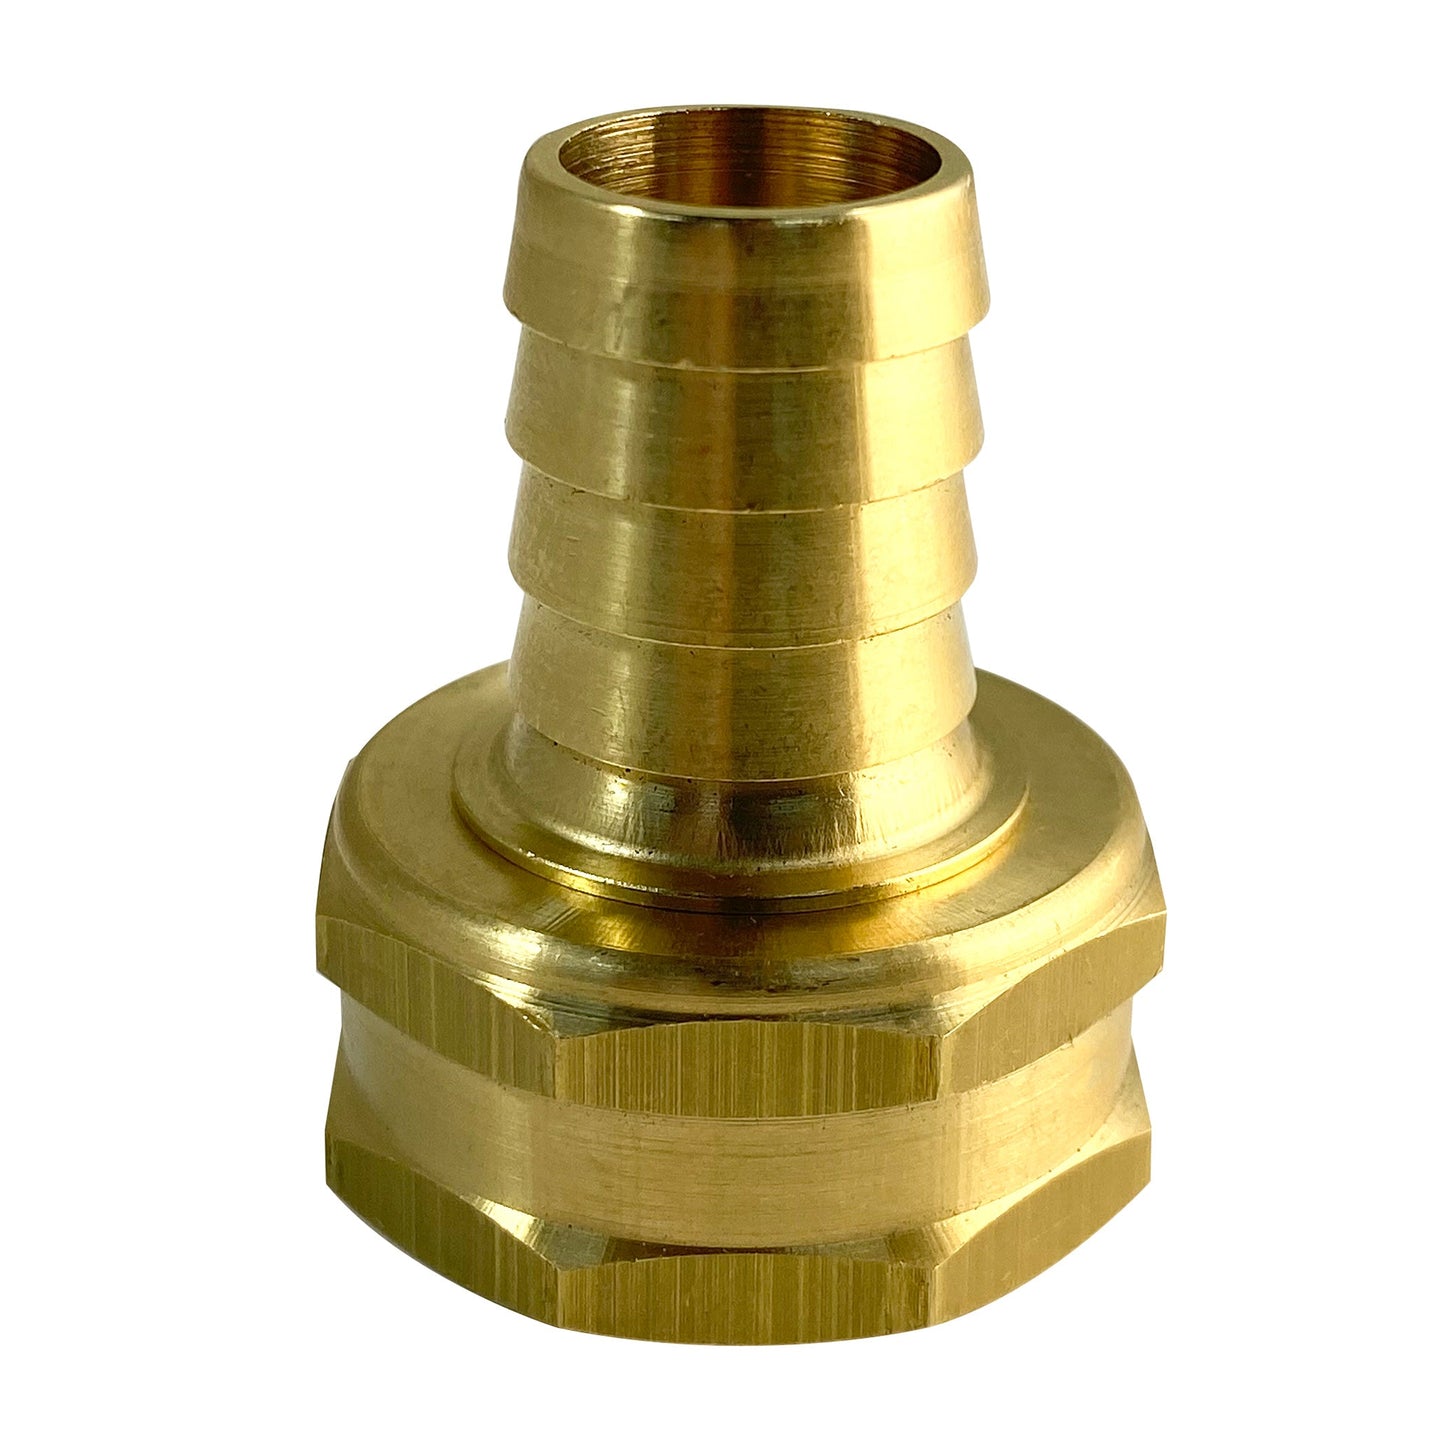 5/8" Contractor Grade Female Expansion Couplings